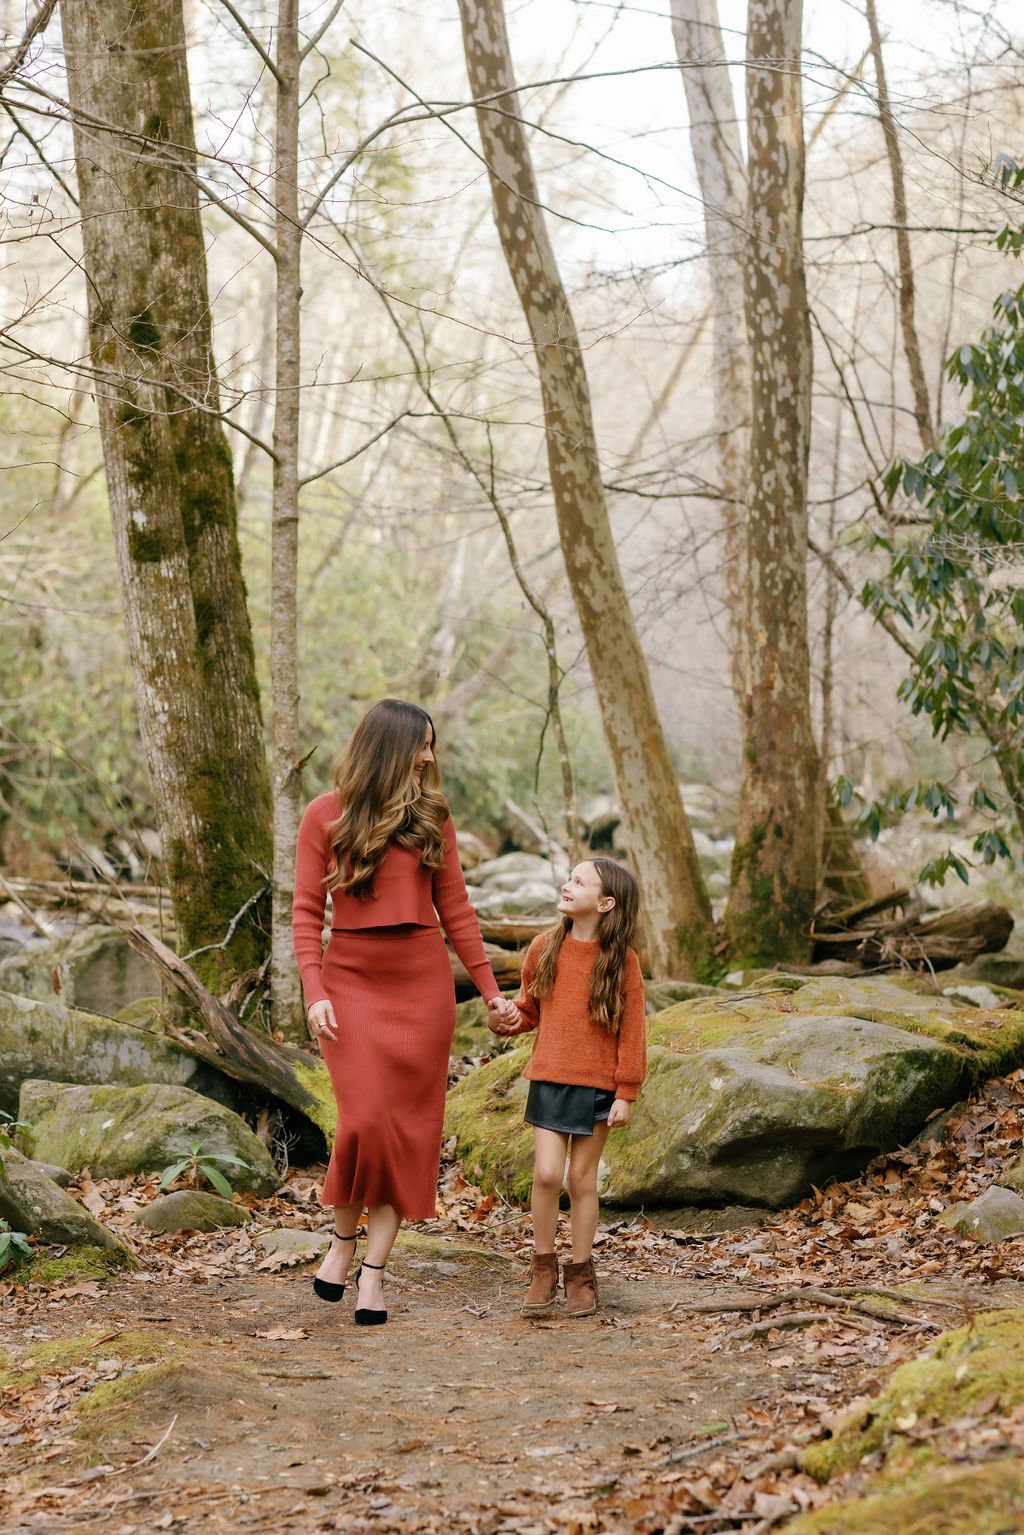 gatlinburg-family-photographer-things-to-do-with-family-in-gatlinburg-mother-walking-with-daughter